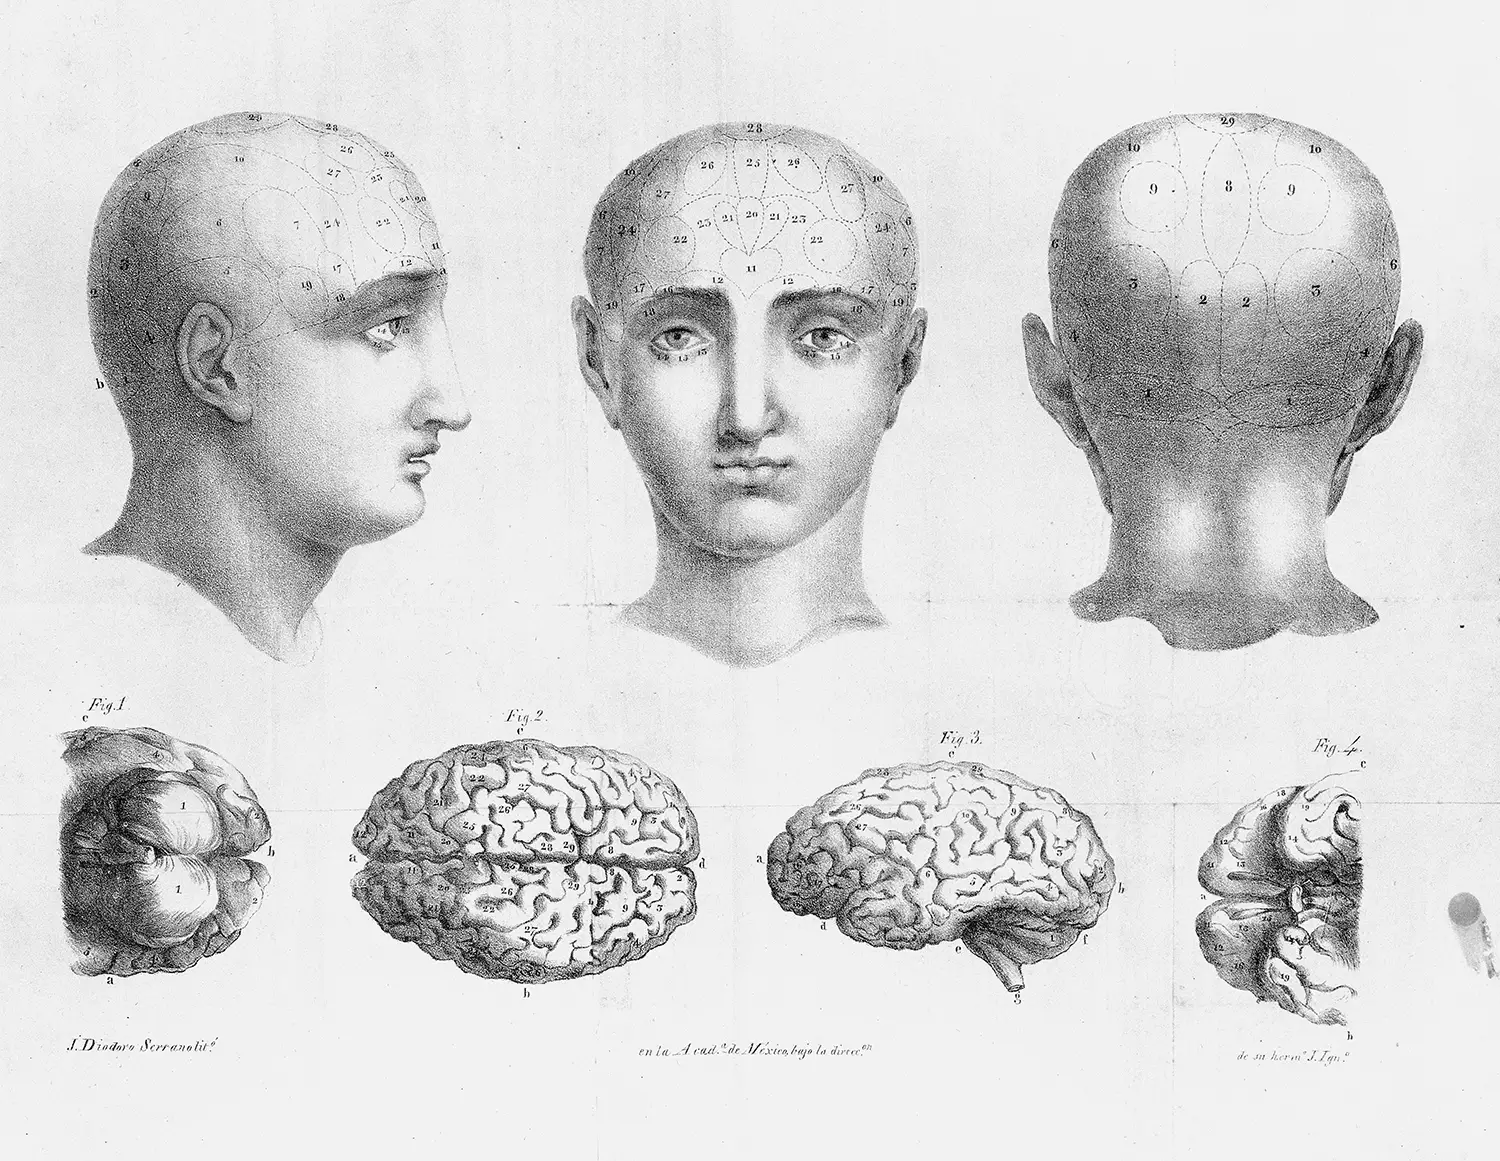 A bust with numbered regions dividing up sections of the head. Beneath is a brain labeled with numbers across its regions.